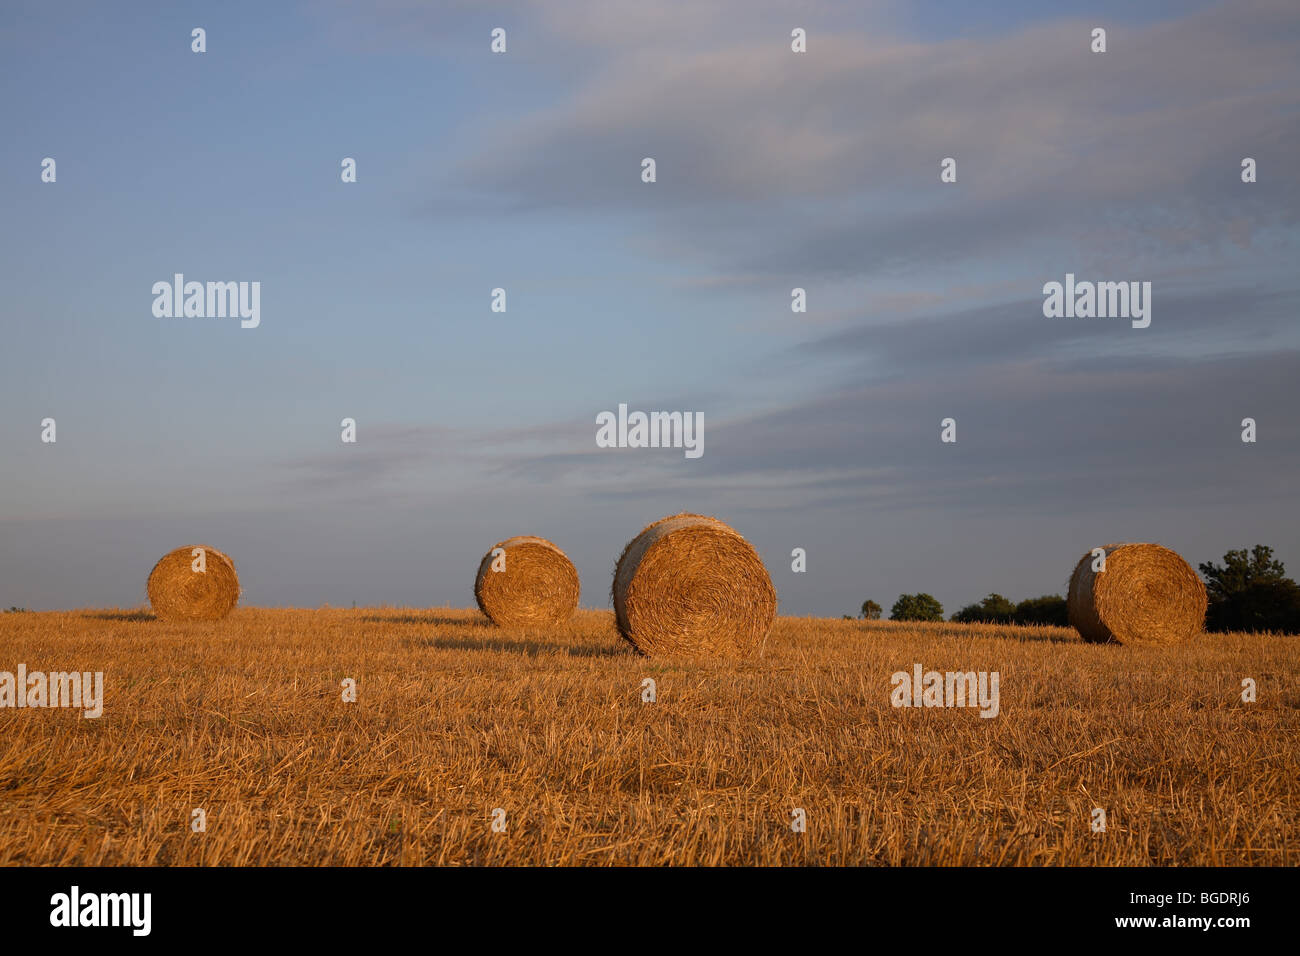 Big bales of straw in sunset on a wheat stubble field against a blue sky with purplish clouds, Denmark Stock Photo